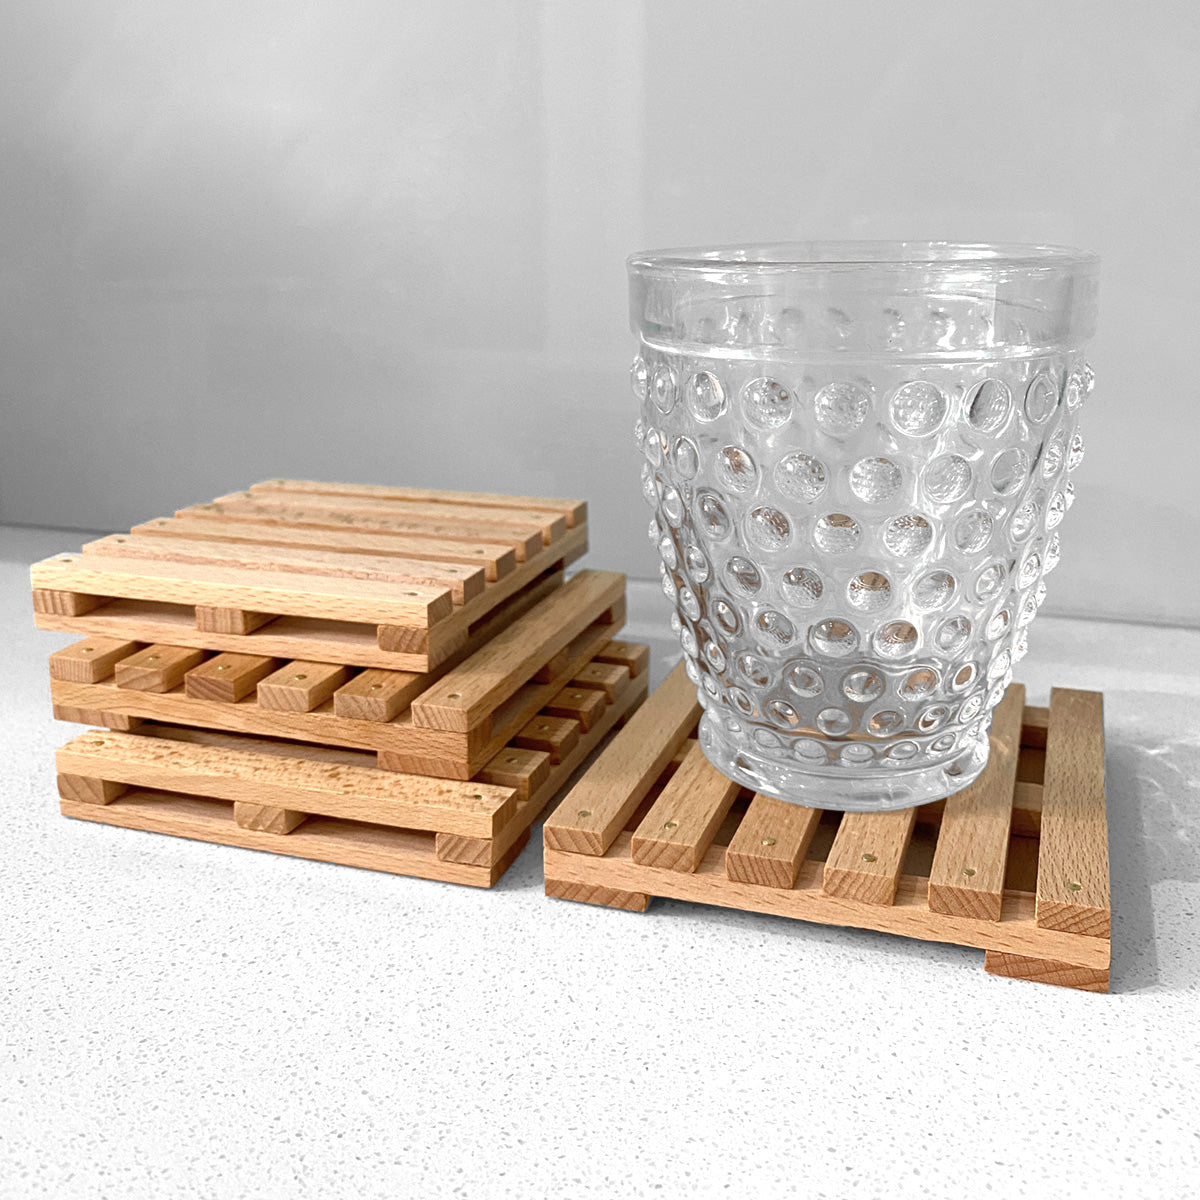 Mini Pallet Wooden Coasters. Shown in situation with a drinking glass and jewellery on top for scale.